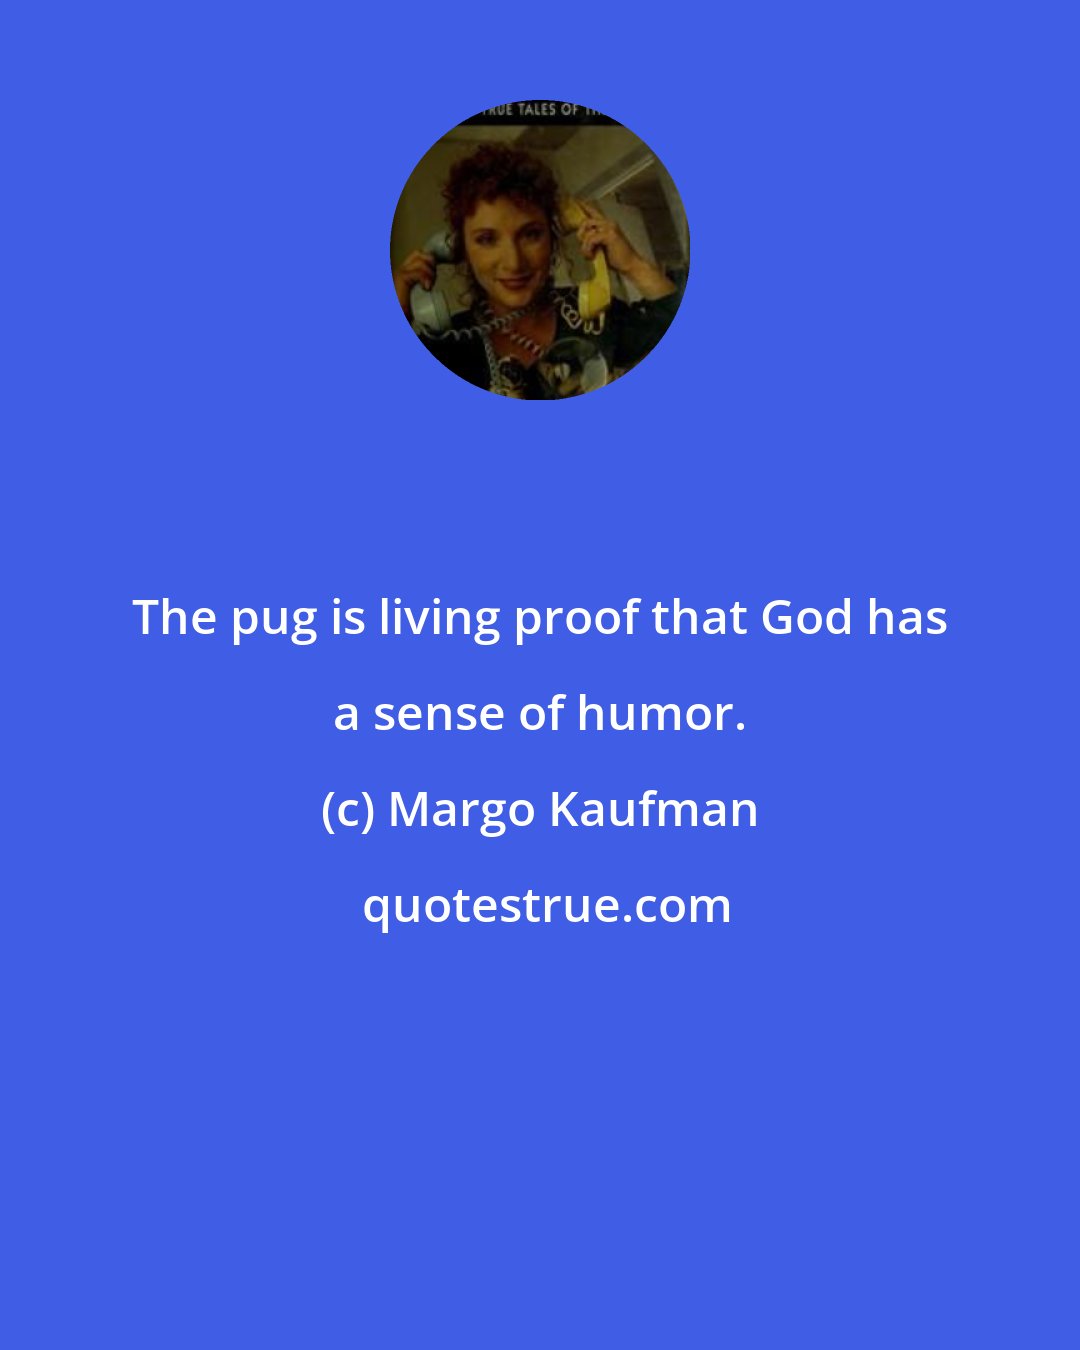 Margo Kaufman: The pug is living proof that God has a sense of humor.